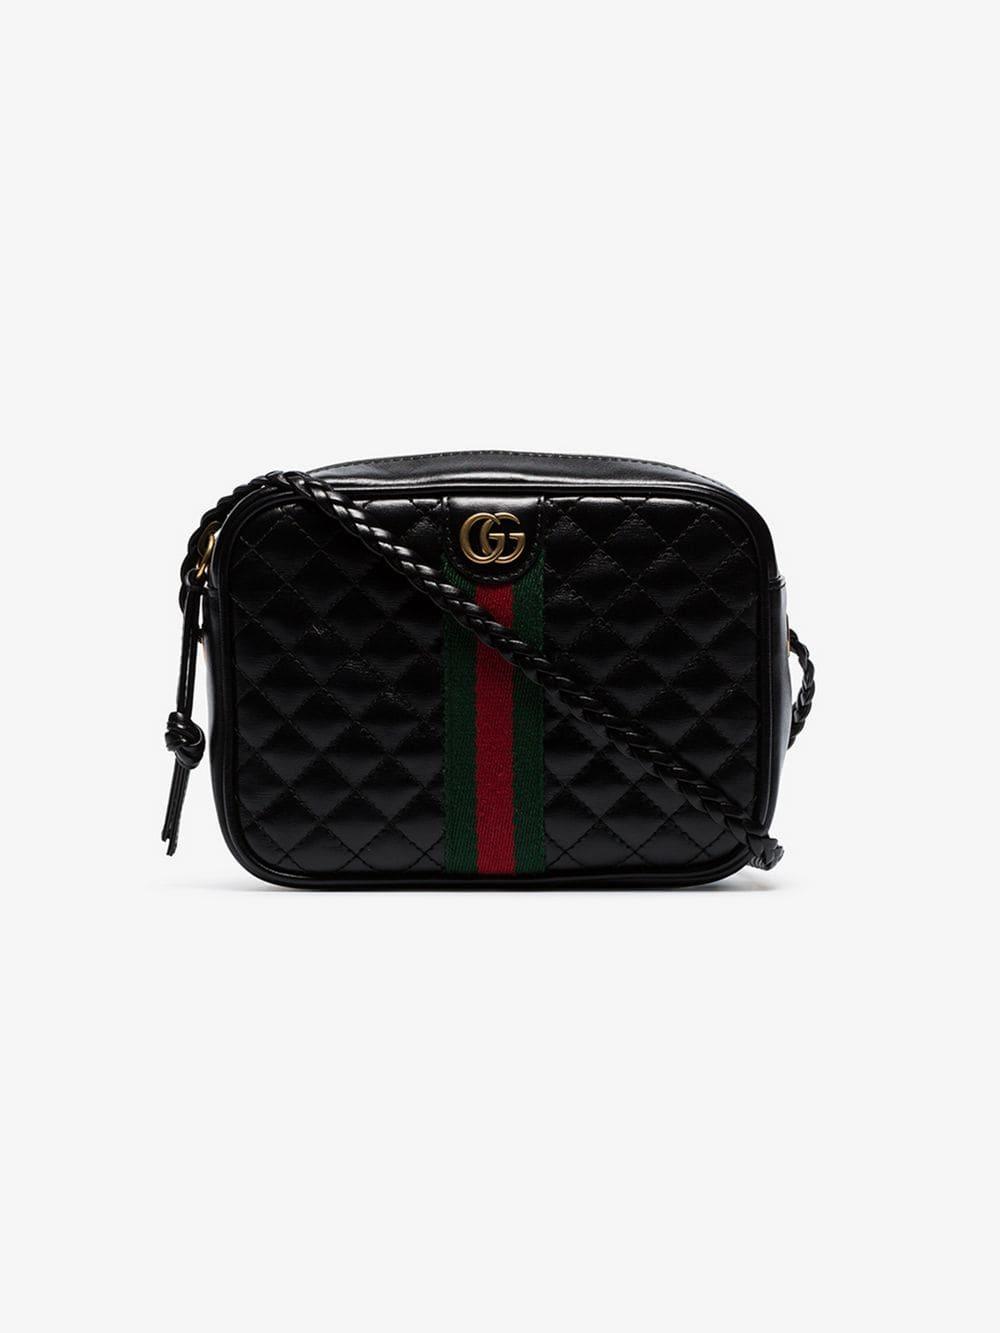 Gucci Black Small Quilted Leather Cross Body Bag - Lyst